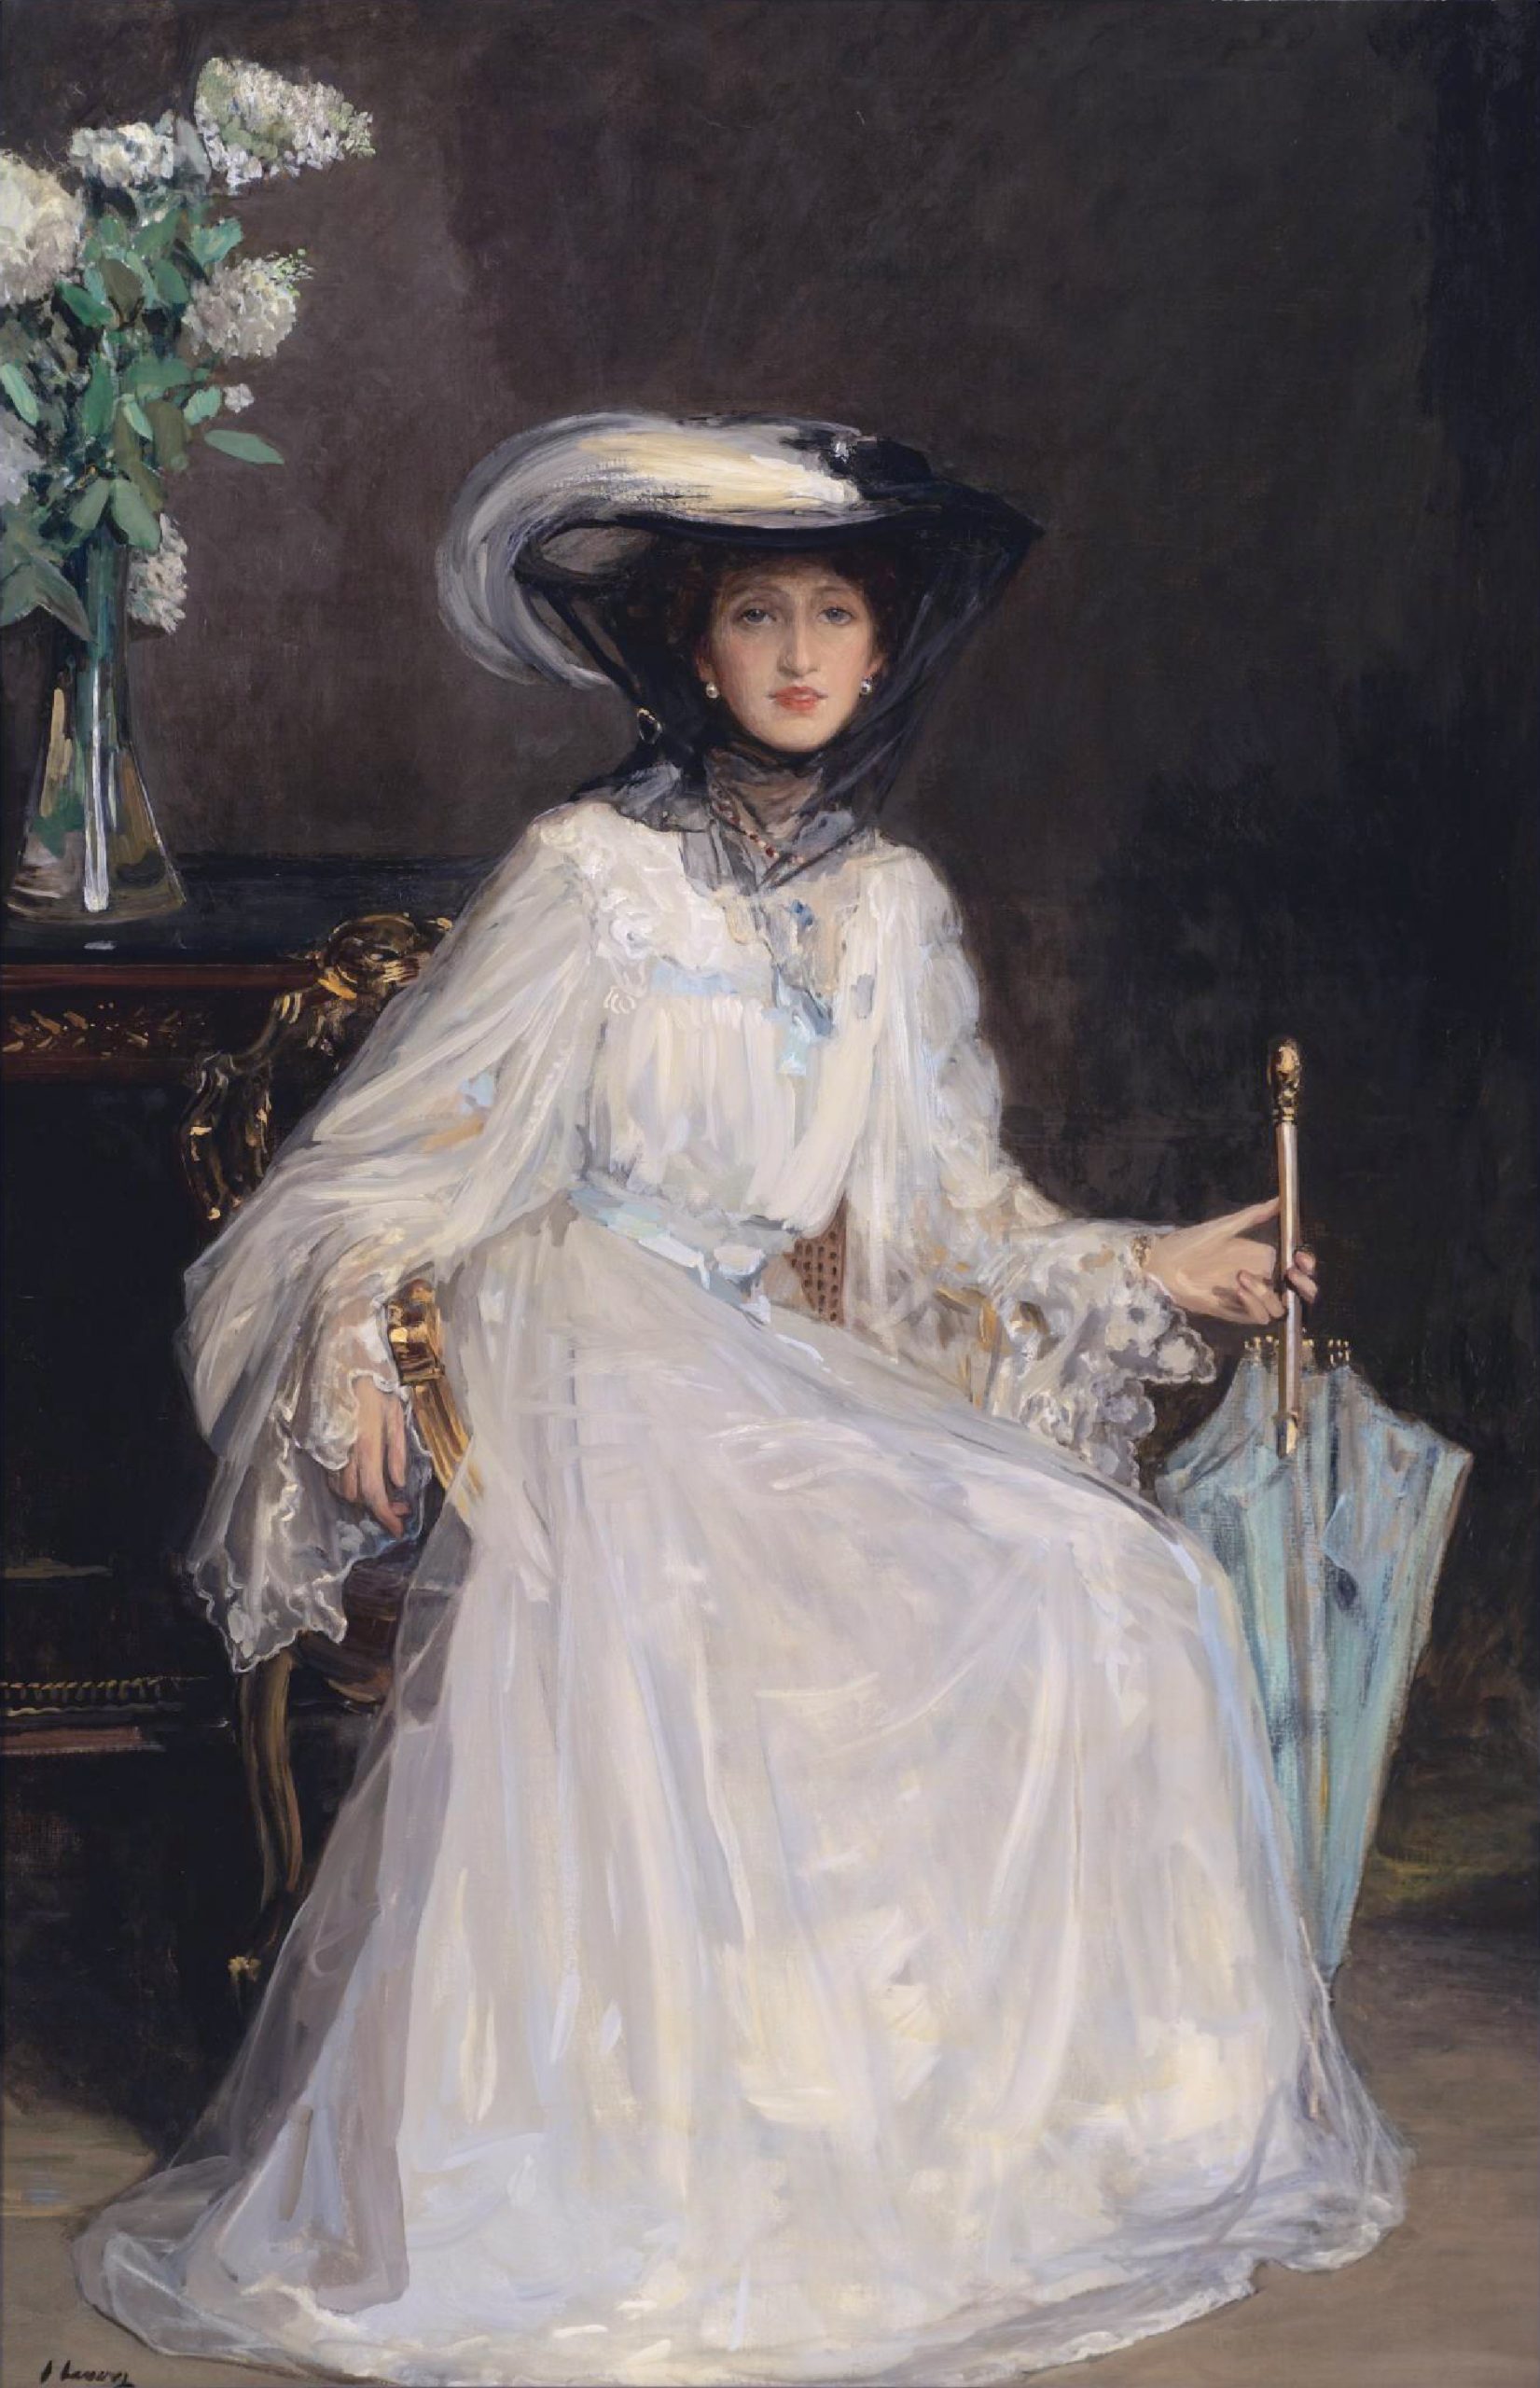 A full-body portrait of a seated woman in a dress holding a closed umbrella